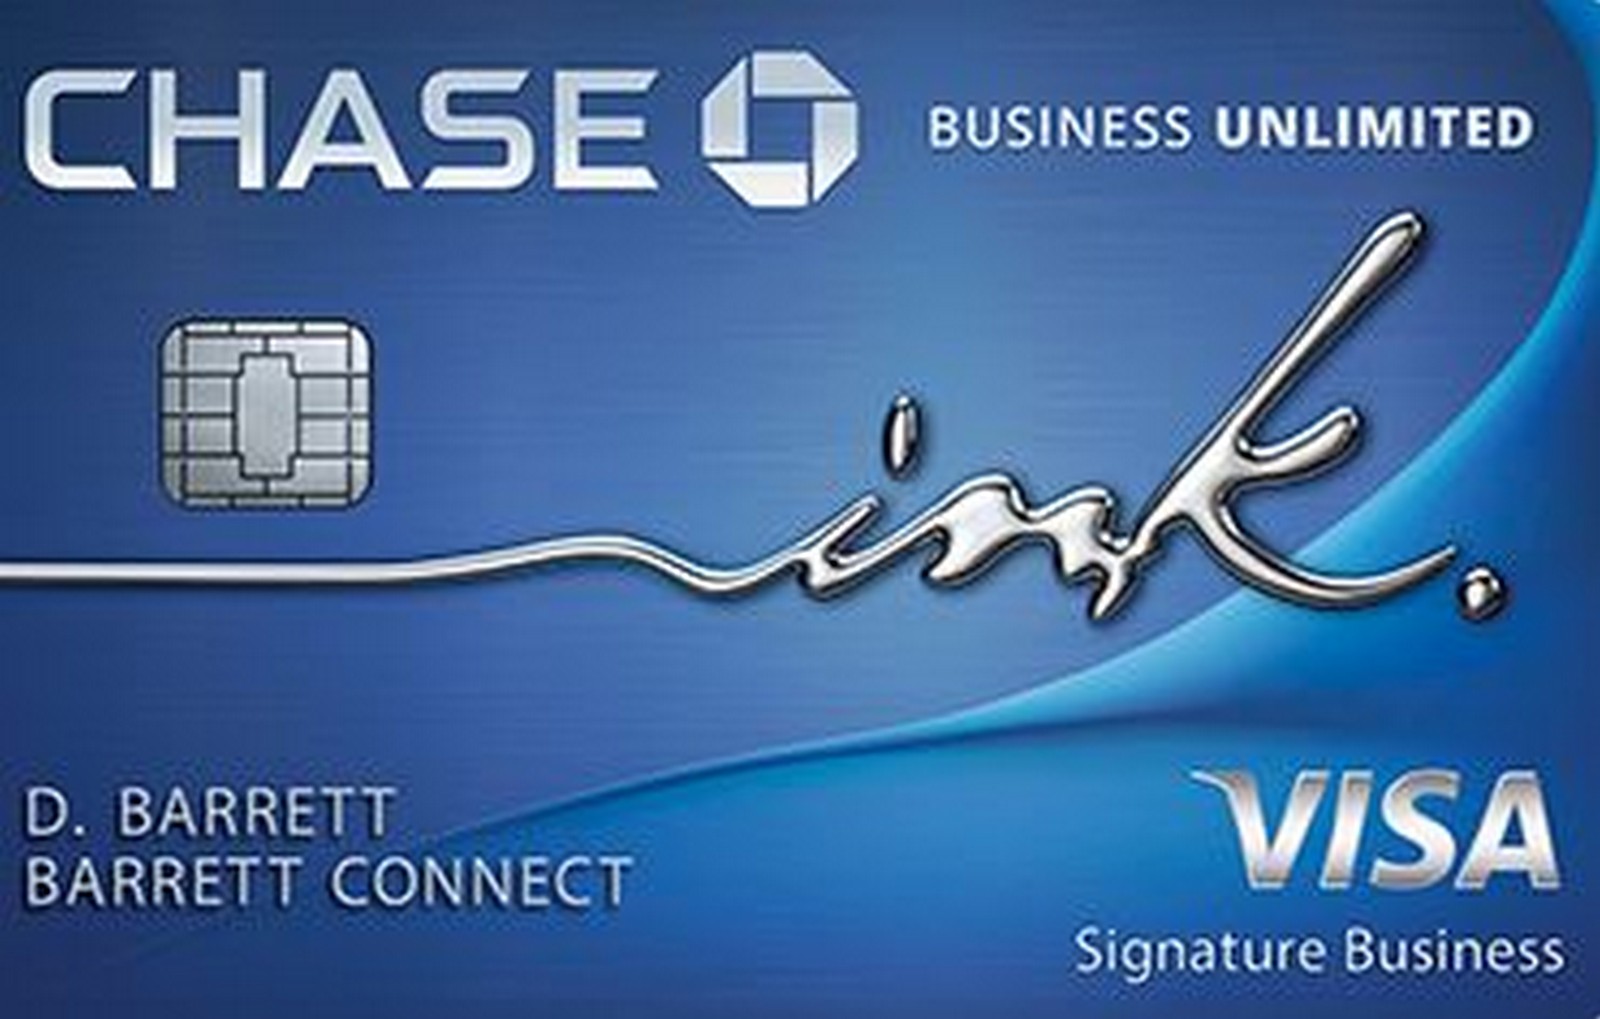 Chase Ink Business Card Referral